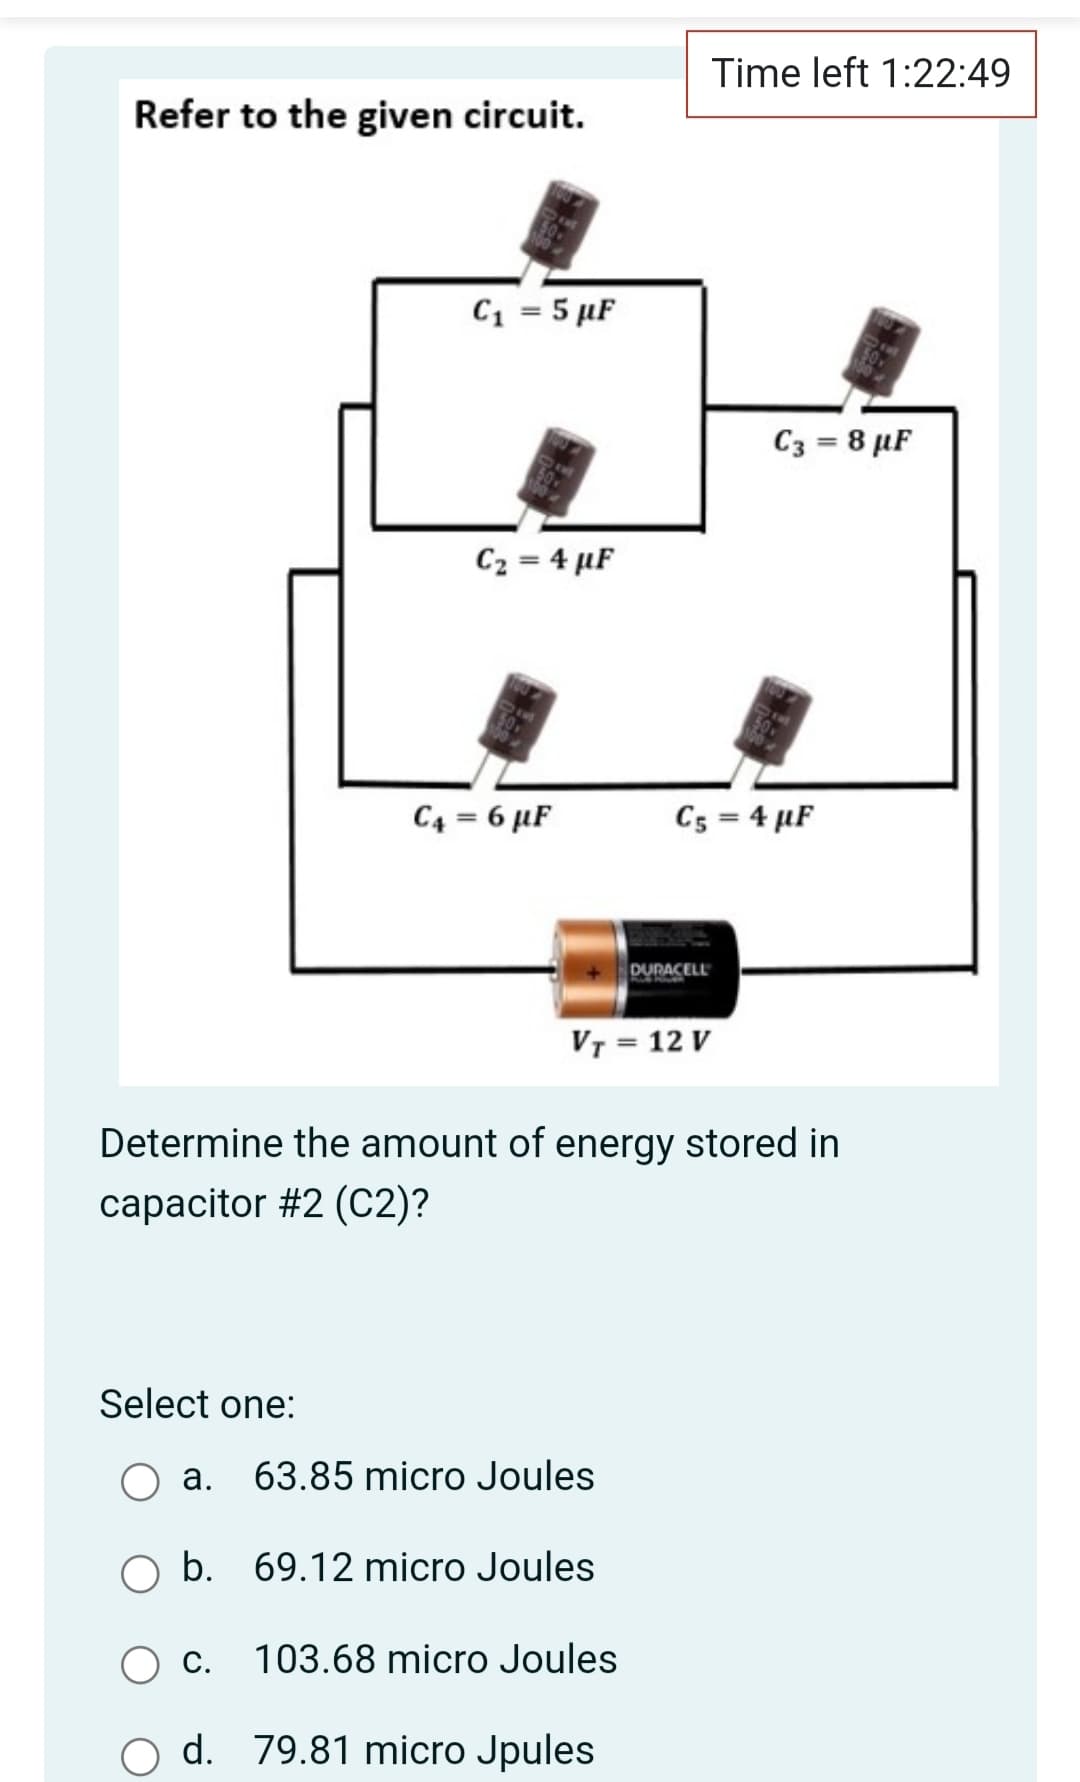 Time left 1:22:49
Refer to the given circuit.
C1 = 5 µF
C3 = 8 µF
C2 = 4 µF
C4 = 6 µF
C5 = 4 µF
DURACELL
VT = 12 V
Determine the amount of energy stored in
capacitor #2 (C2)?
Select one:
а.
63.85 micro Joules
O b. 69.12 micro Joules
O c.
103.68 micro Joules
d. 79.81 micro Jpules
